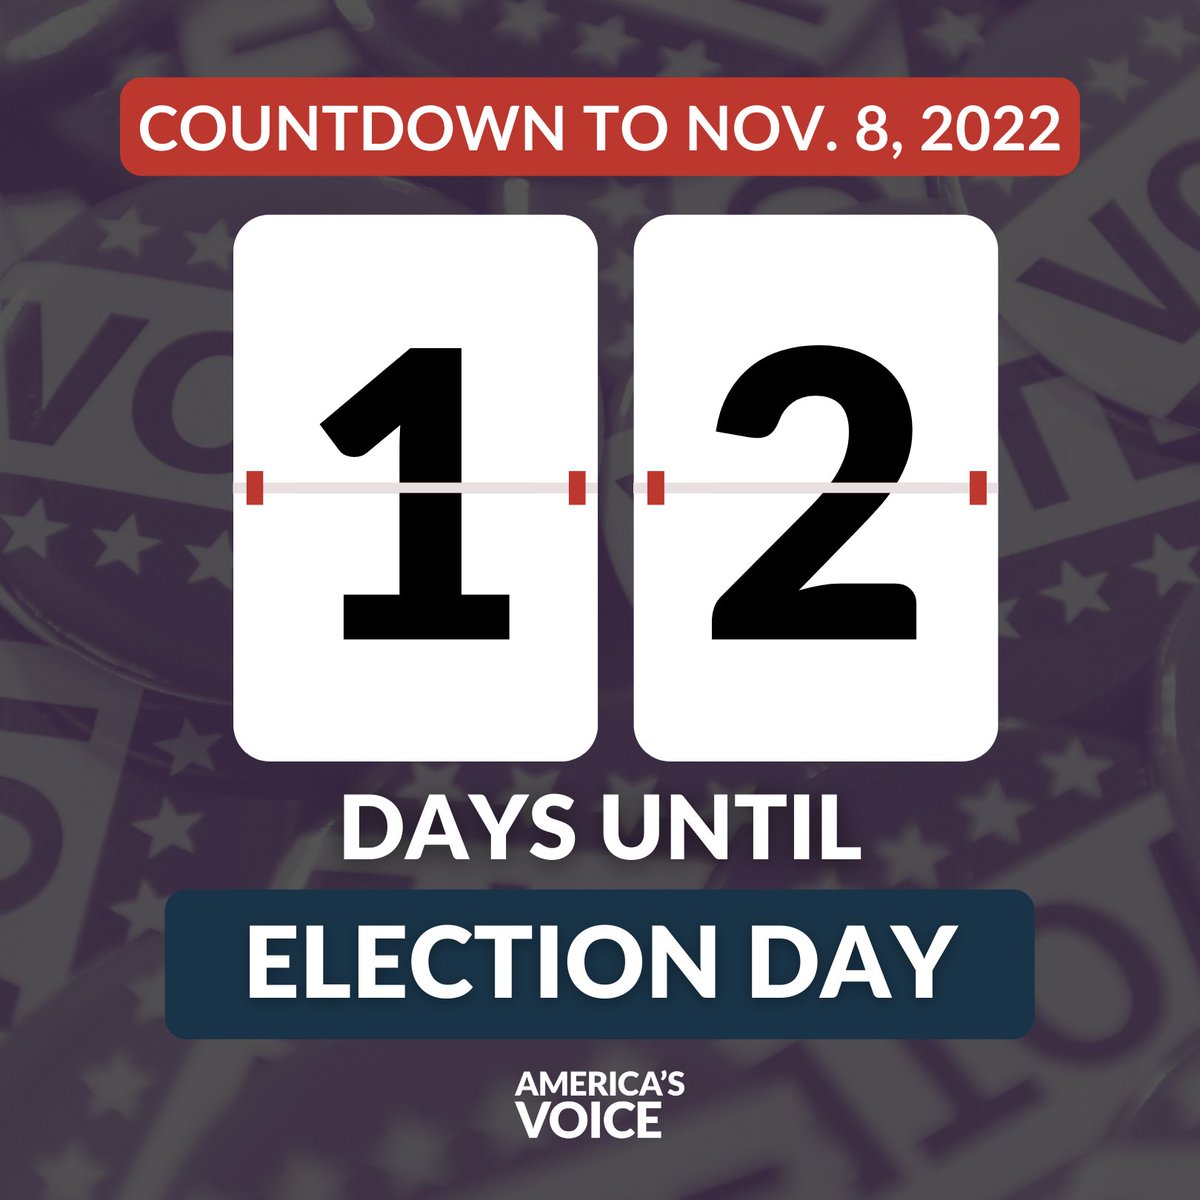 We're 12 days away from the Midterm Election. Make your plan to go vote and tell your friends and family to vote too. To find a polling place near you, information on voting by mail and more, click here ⬇️ bit.ly/3TzQiUP #Election2022